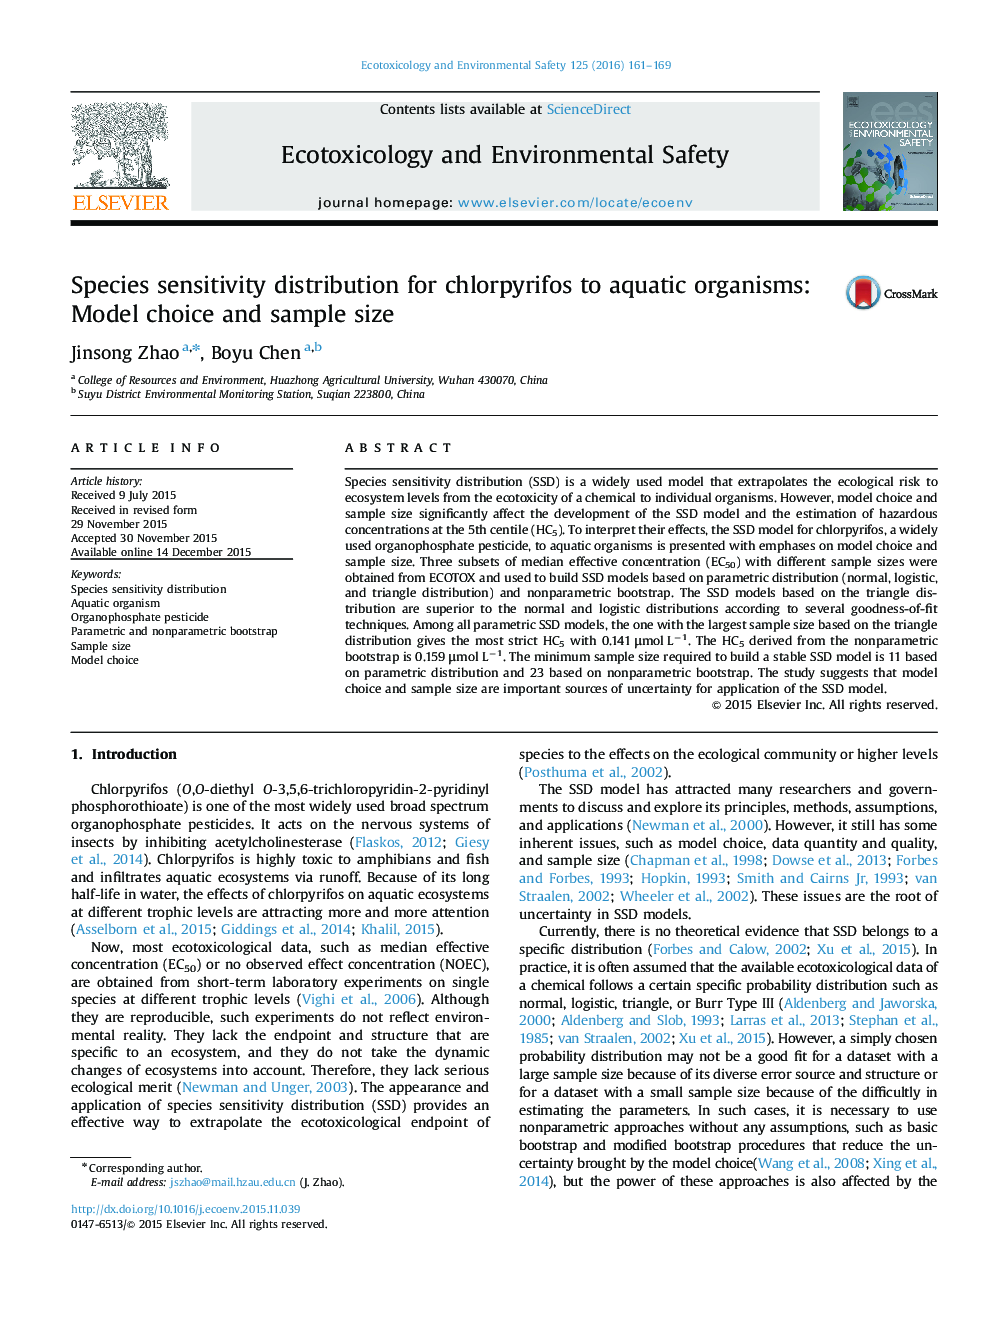 Species sensitivity distribution for chlorpyrifos to aquatic organisms: Model choice and sample size